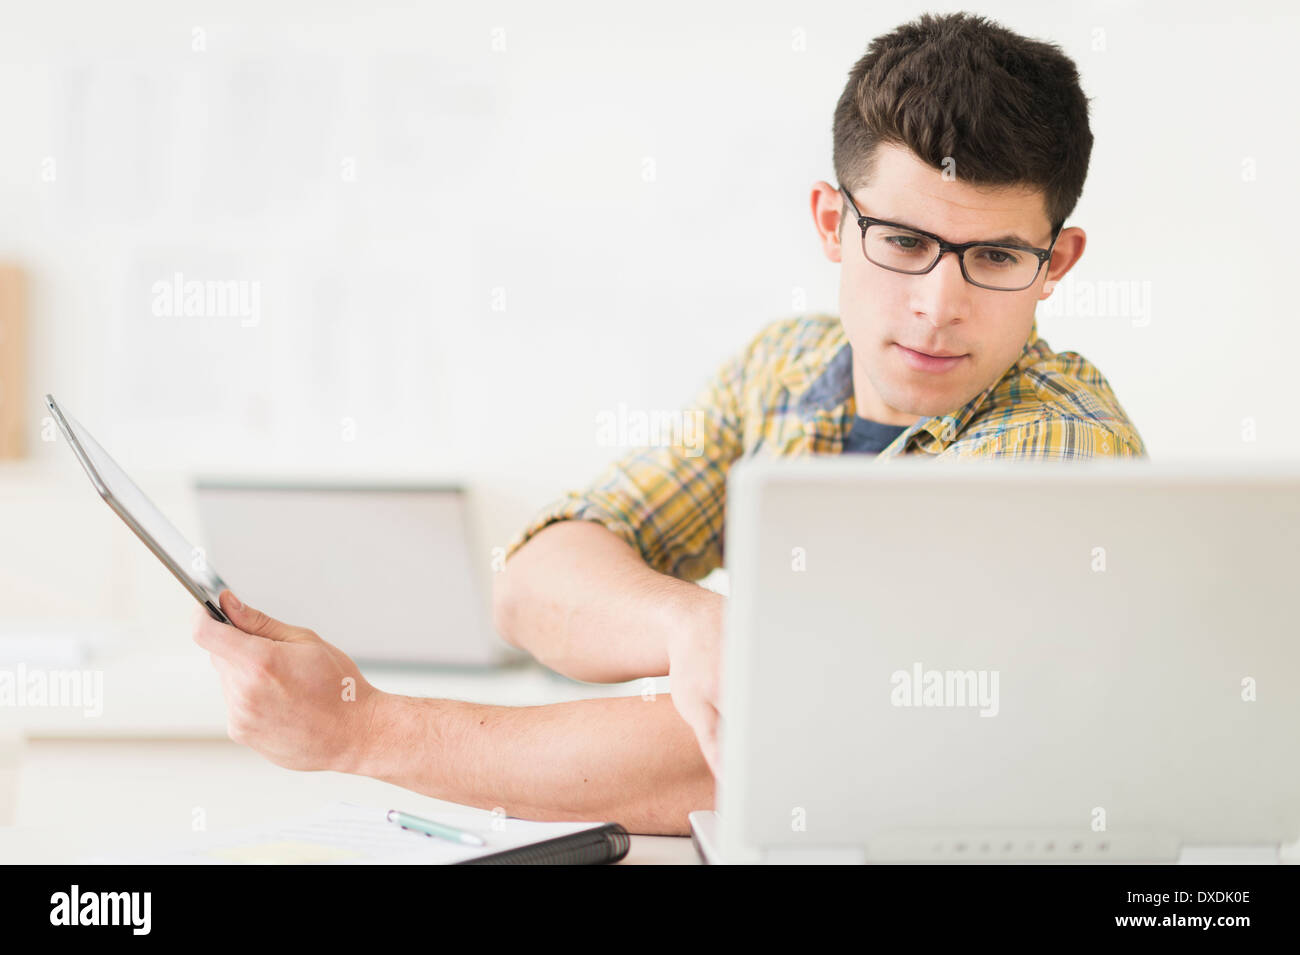 Young man using tablet Stock Photo